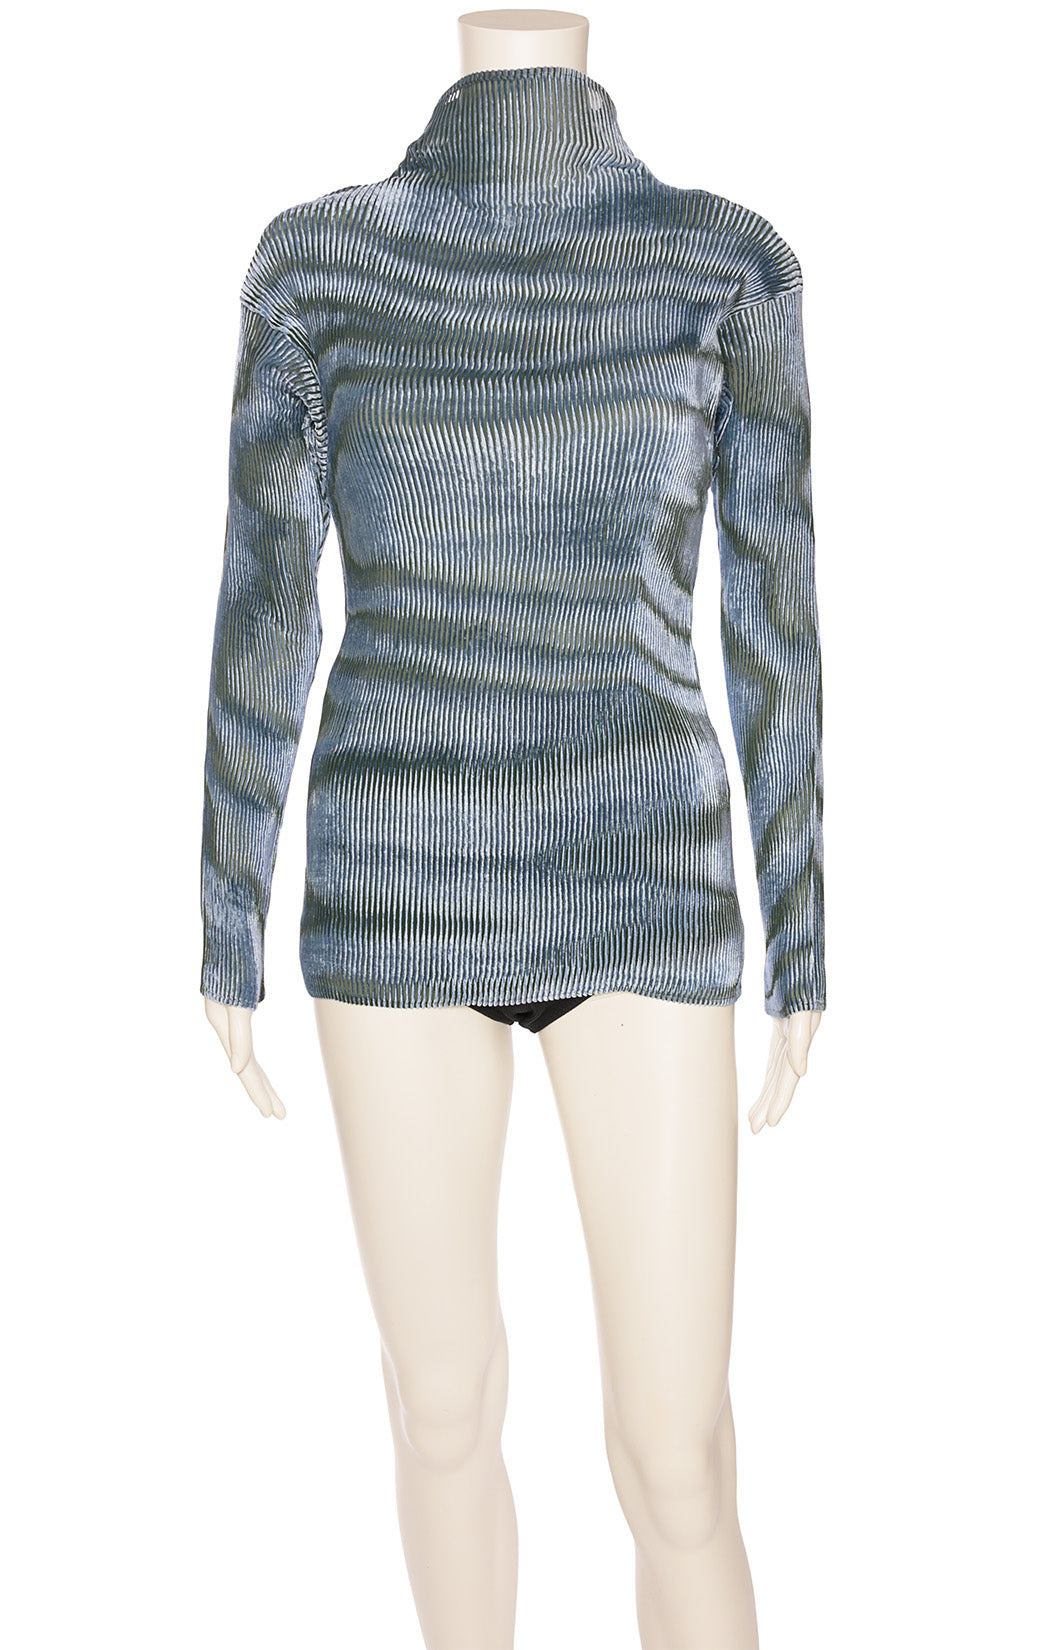 Front view of ISSEY MIYAKE Top Size: Medium